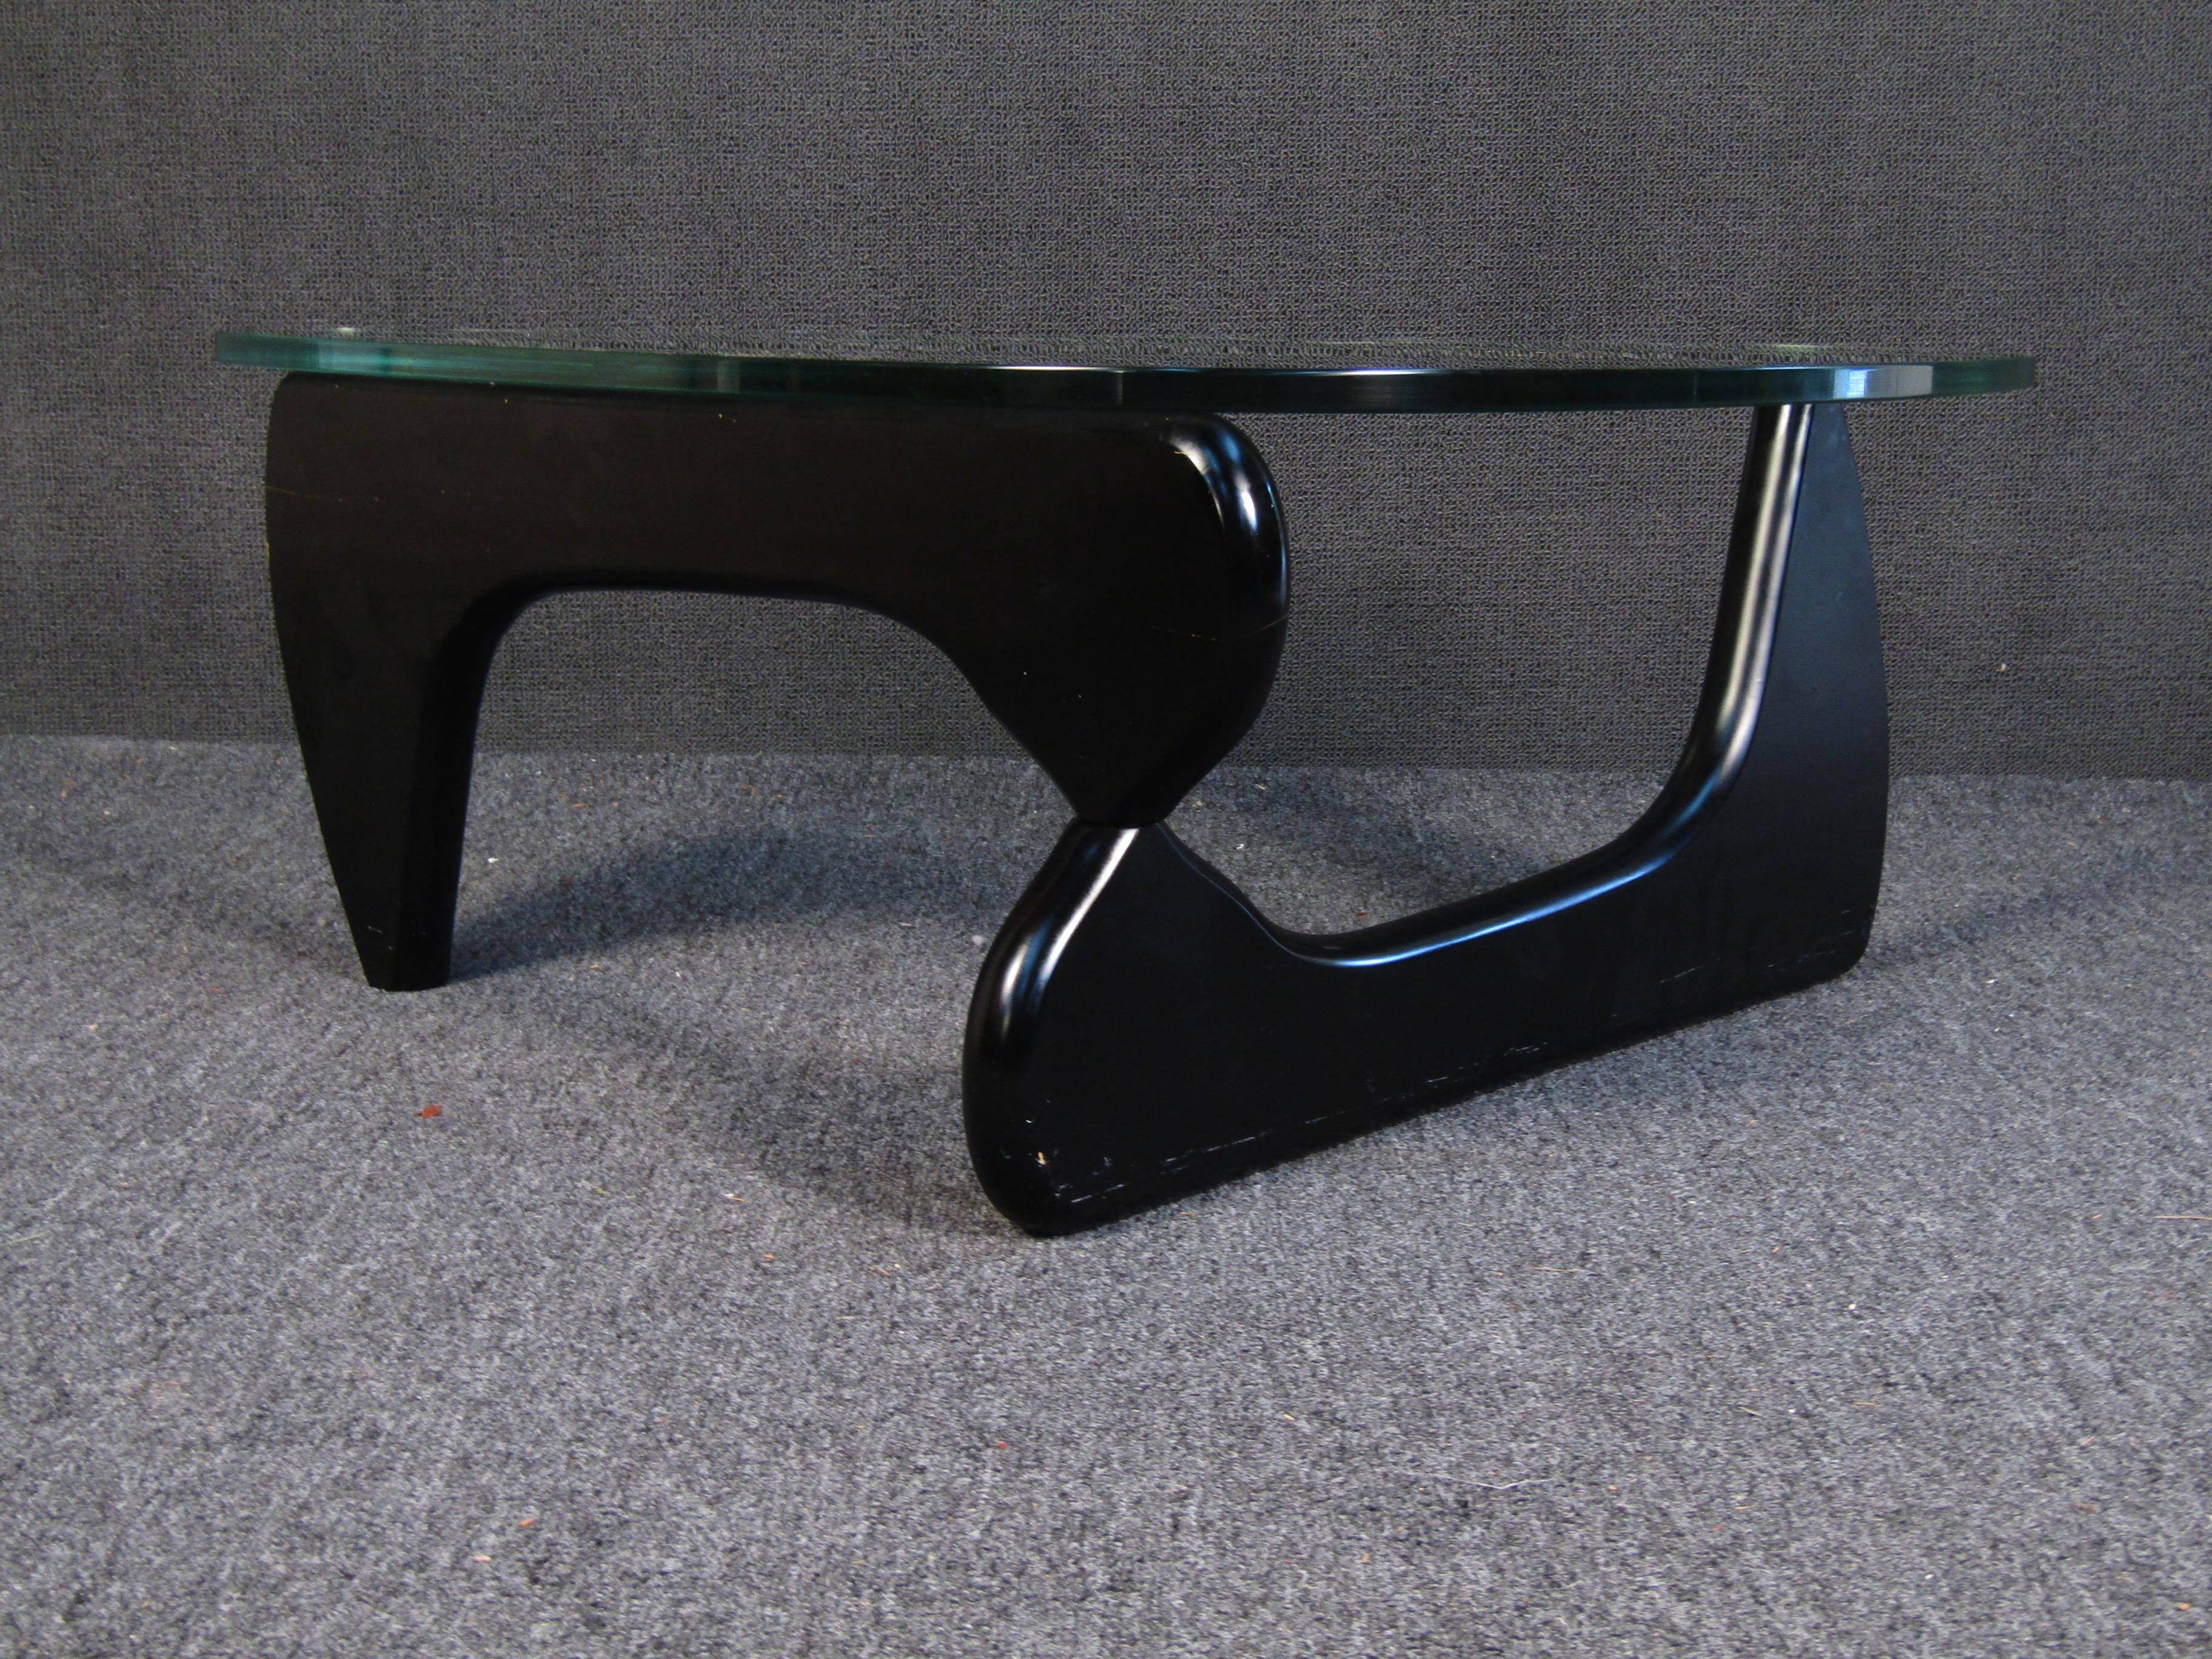 This Mid-Century Modern coffee table boasts two smoothly shaped pieces of solid wood. The pieces interlock in a tripod to support a thick glass tabletop. Please confirm item location (NY/NJ).